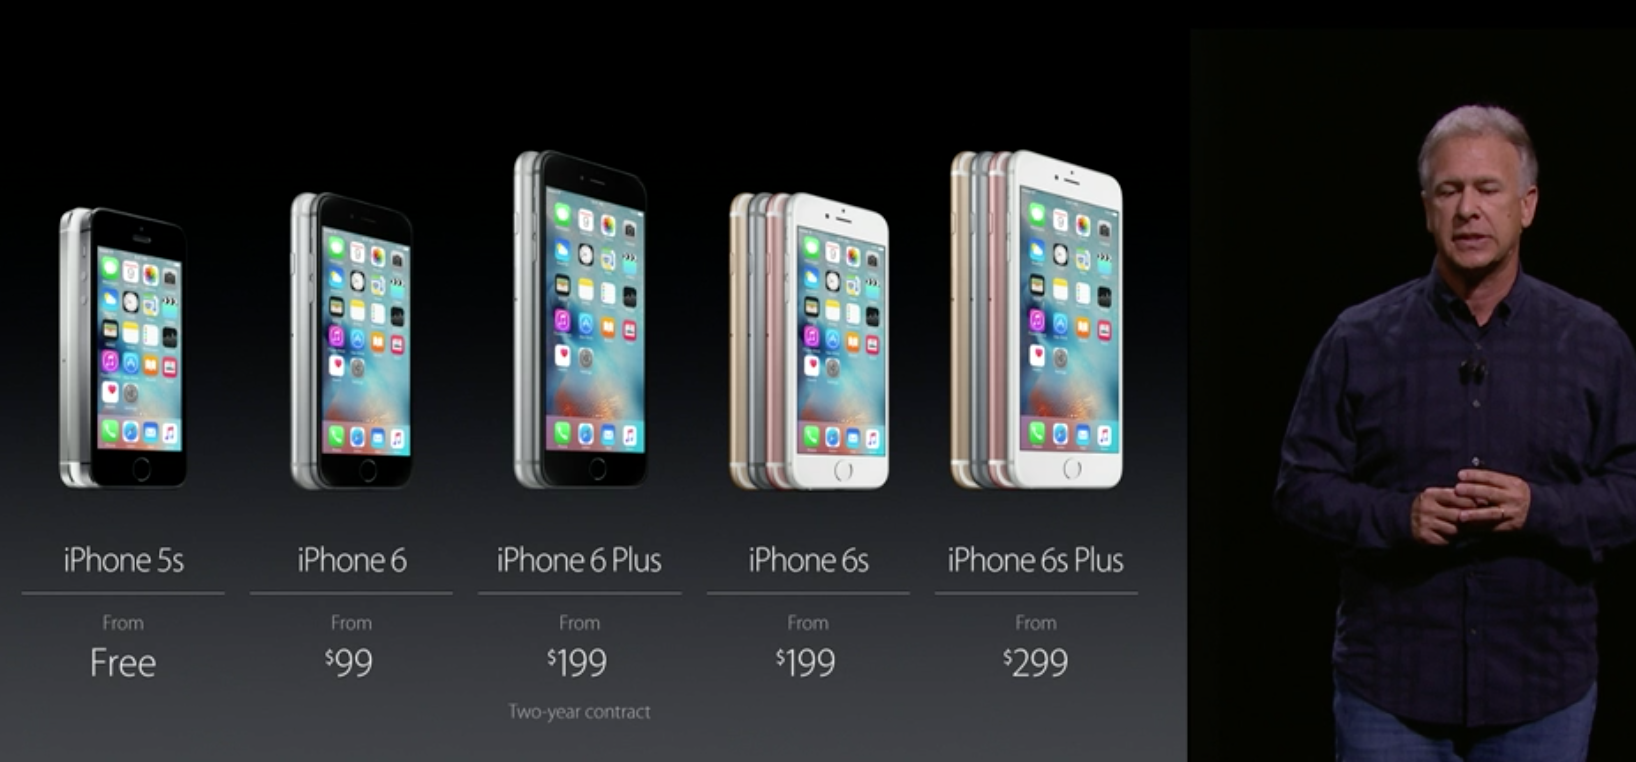 comparing the iphones from 5 to 6plus